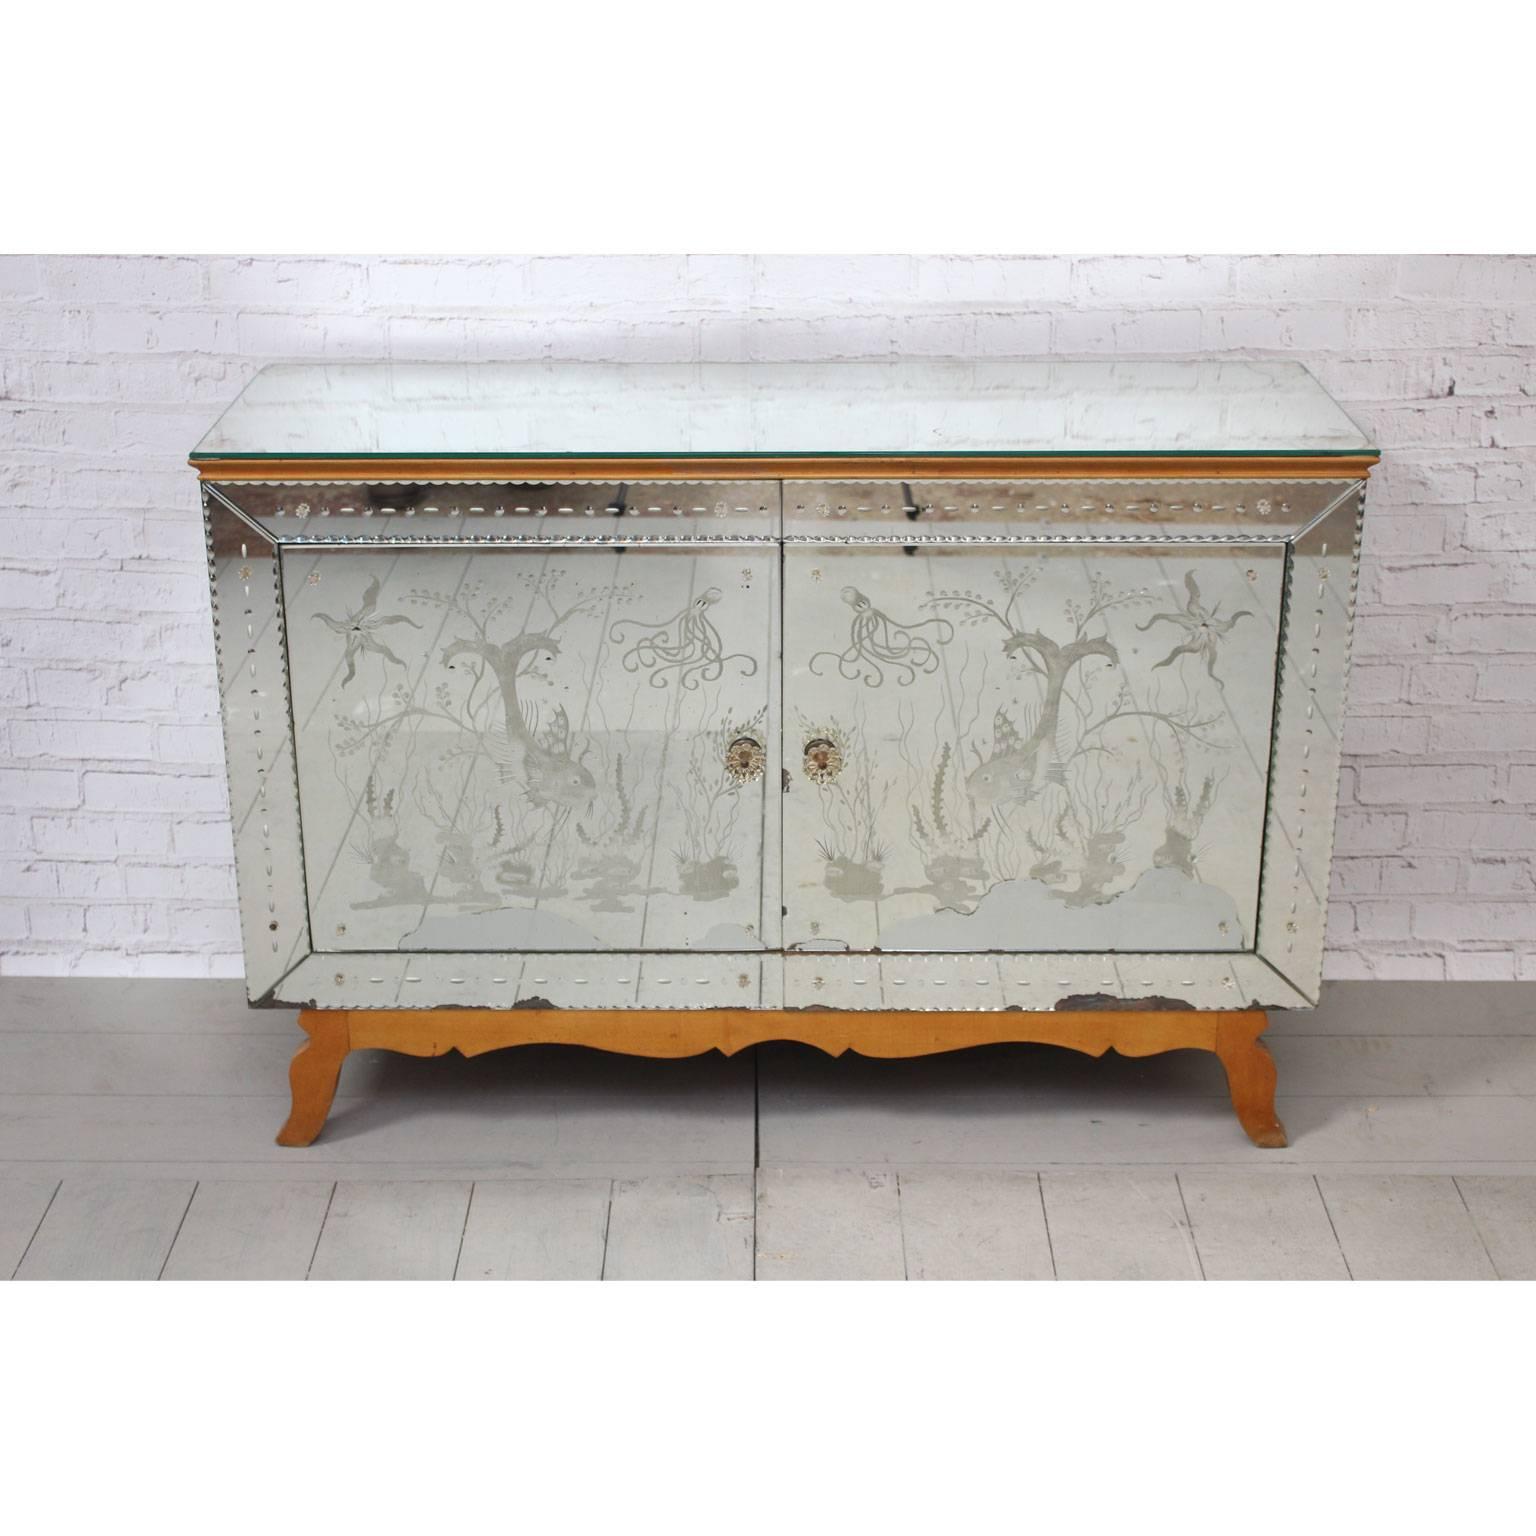 This charming mirrored sideboard, which has a lovely glow about it is decorated with etched fish, octopi, starfish and sea life. The mirror which covers the top and sides as well as the front is beautifully aged. Every detail is considered down to